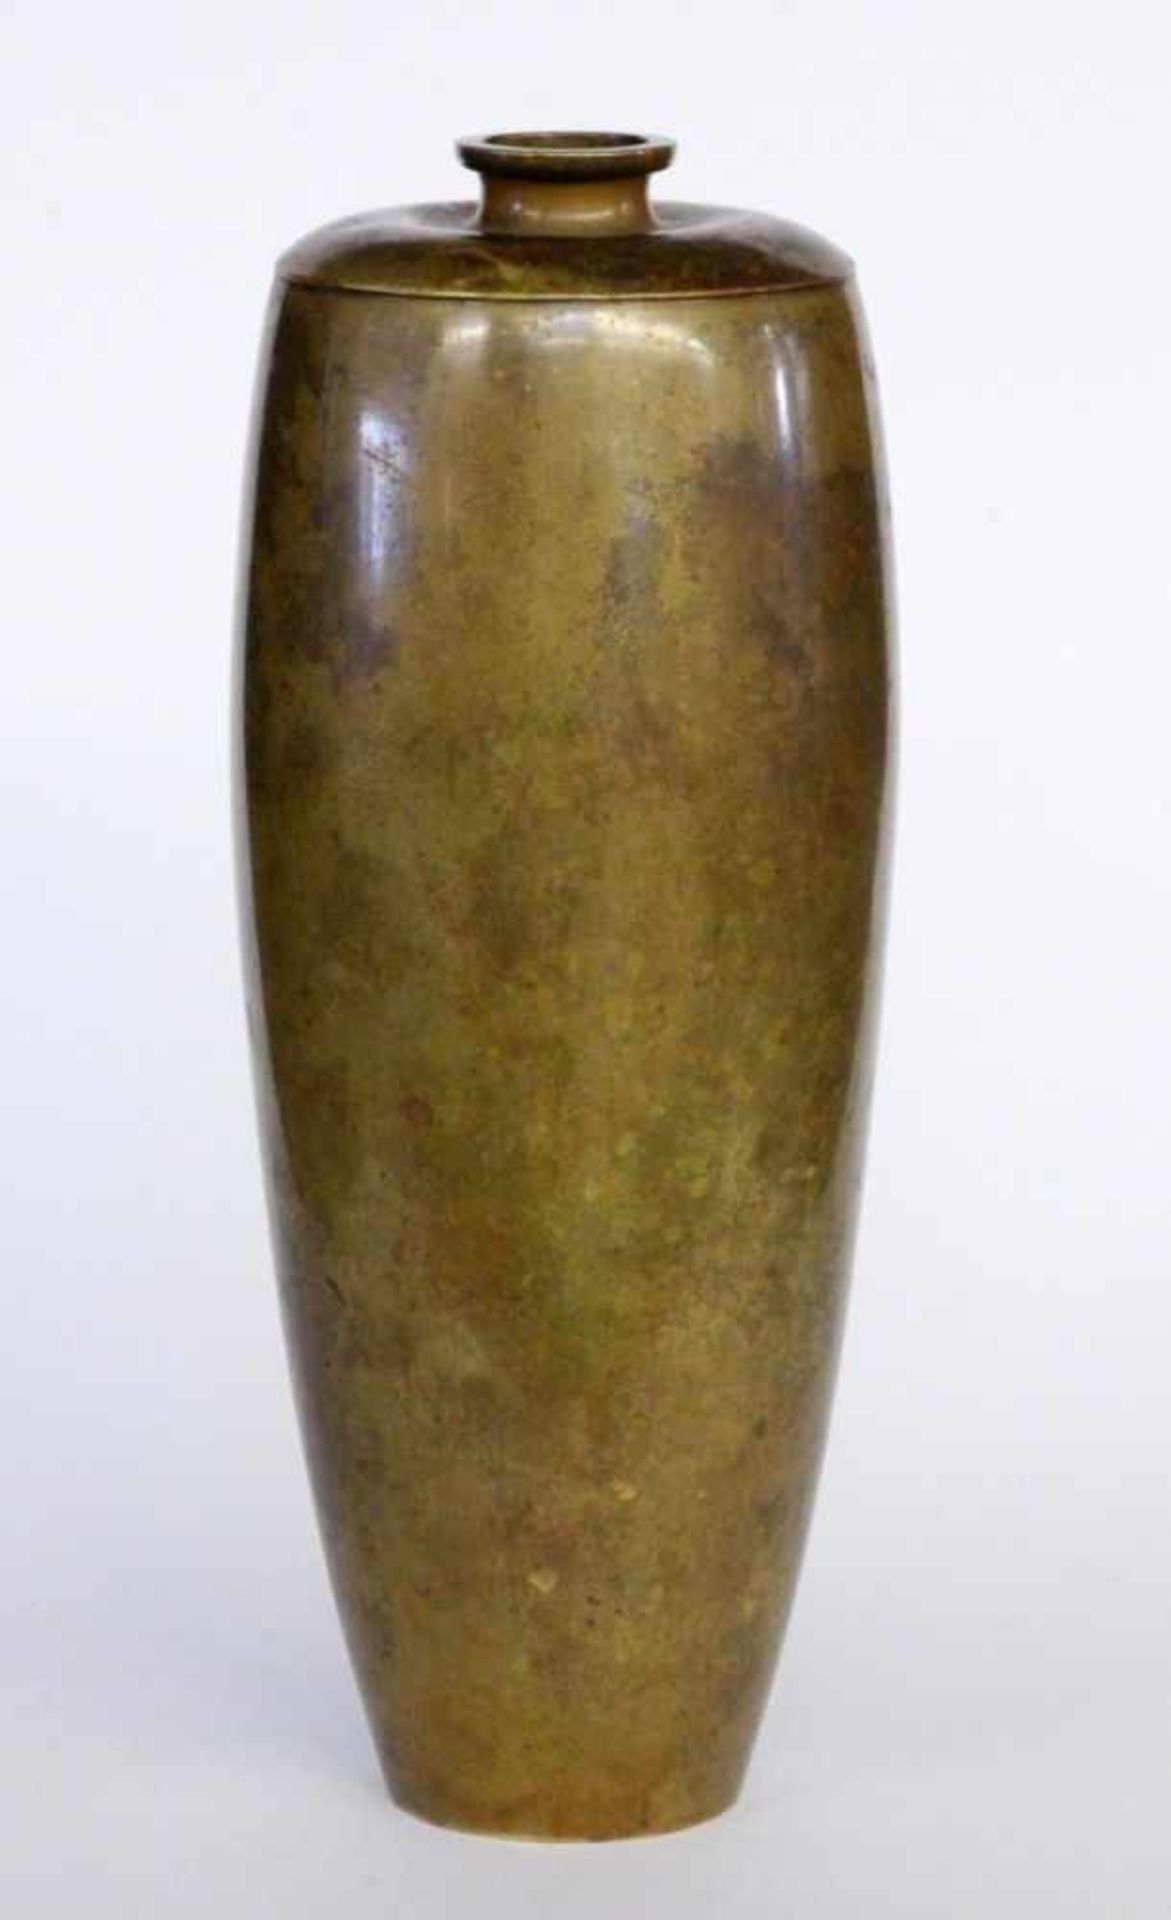 A VASE Japan. Meiji period Bronze with lily decoration in relief. Seal mark: Inoue. 22.5cm high. - Image 2 of 3